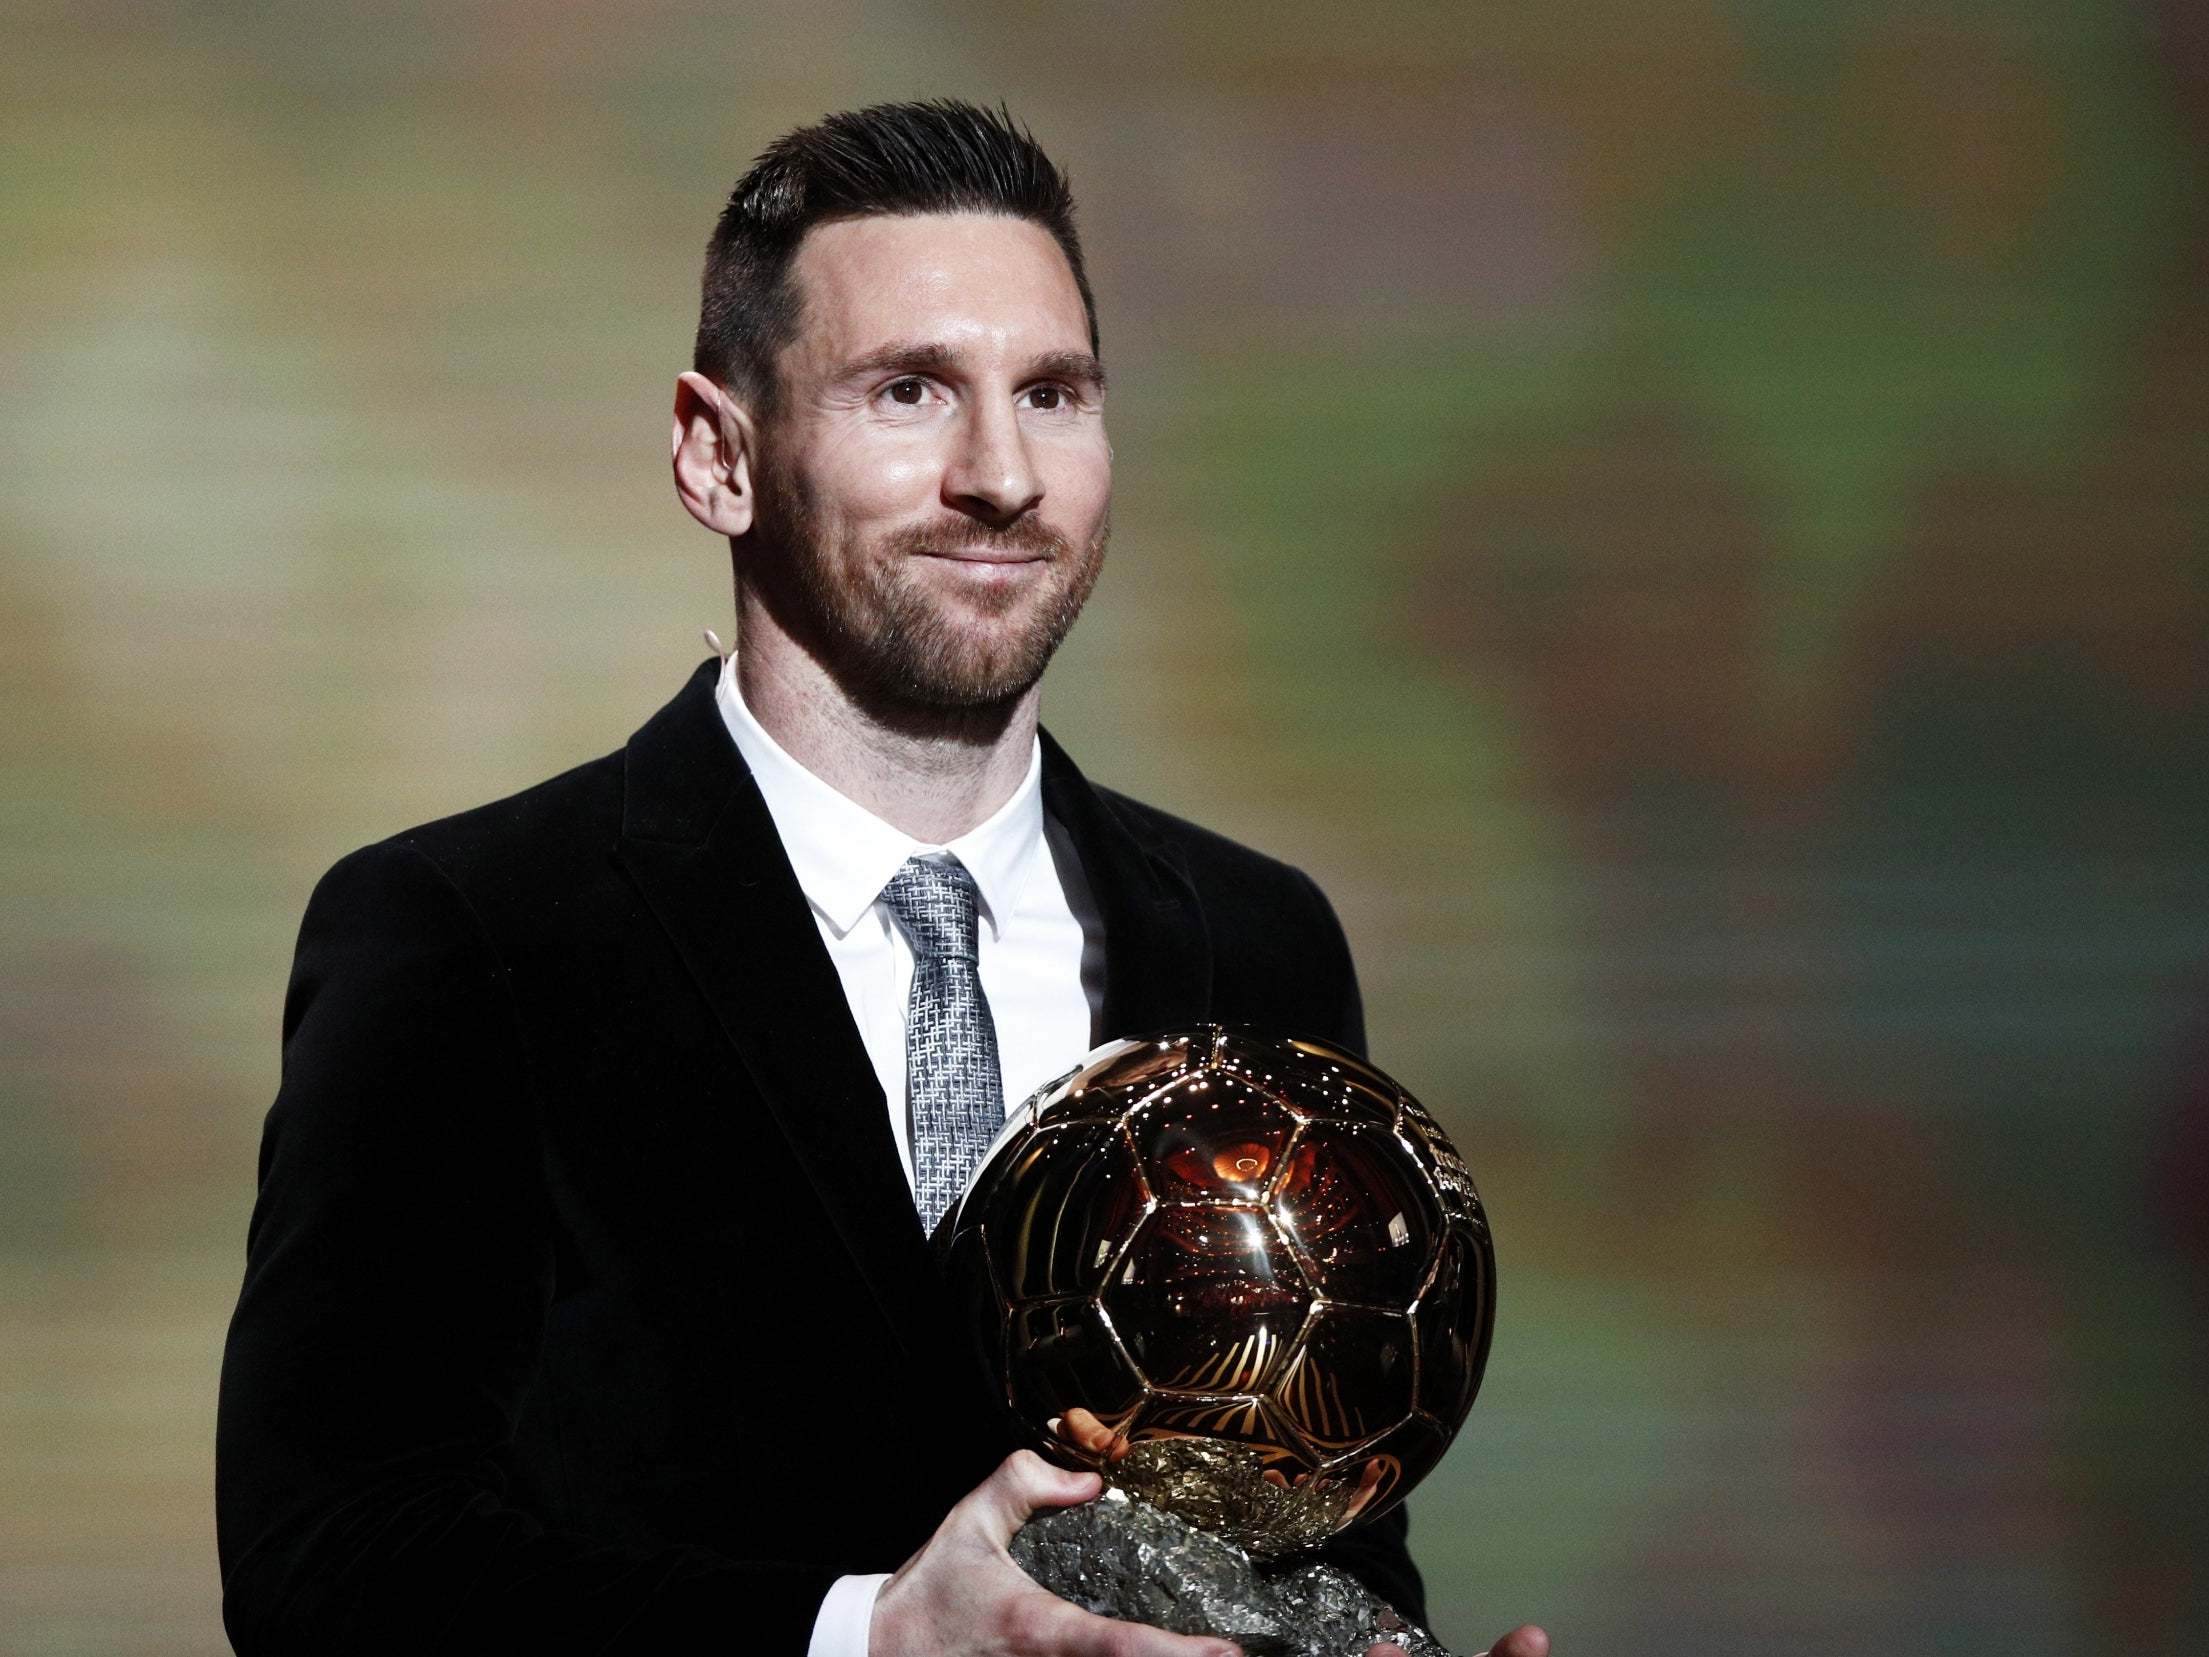 Lionel Messi collects his sixth Ballon d'Or at a ceremony in Paris